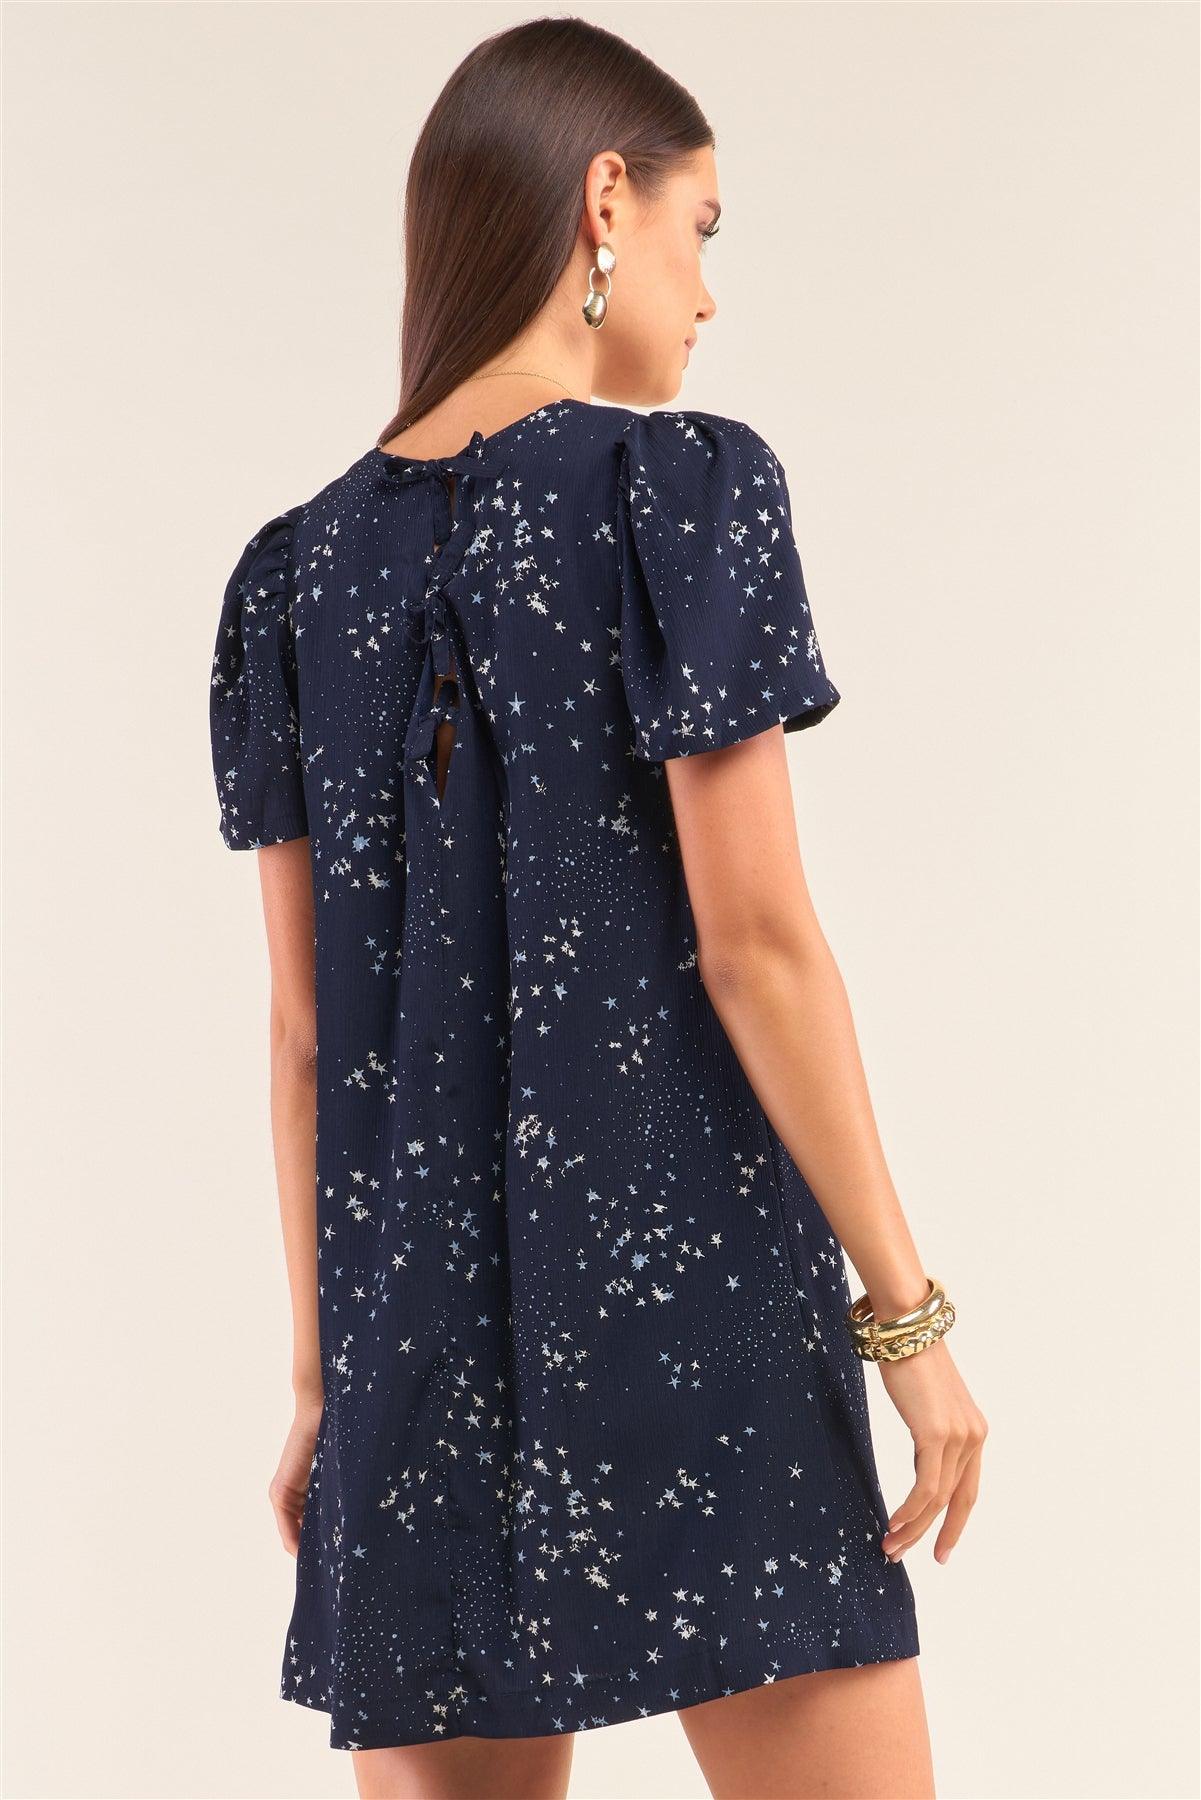 Make A Wish Navy Blue Star Print Loose Fit Self-Tie Front And Back Deep Plunge V-Neck Mini Dress